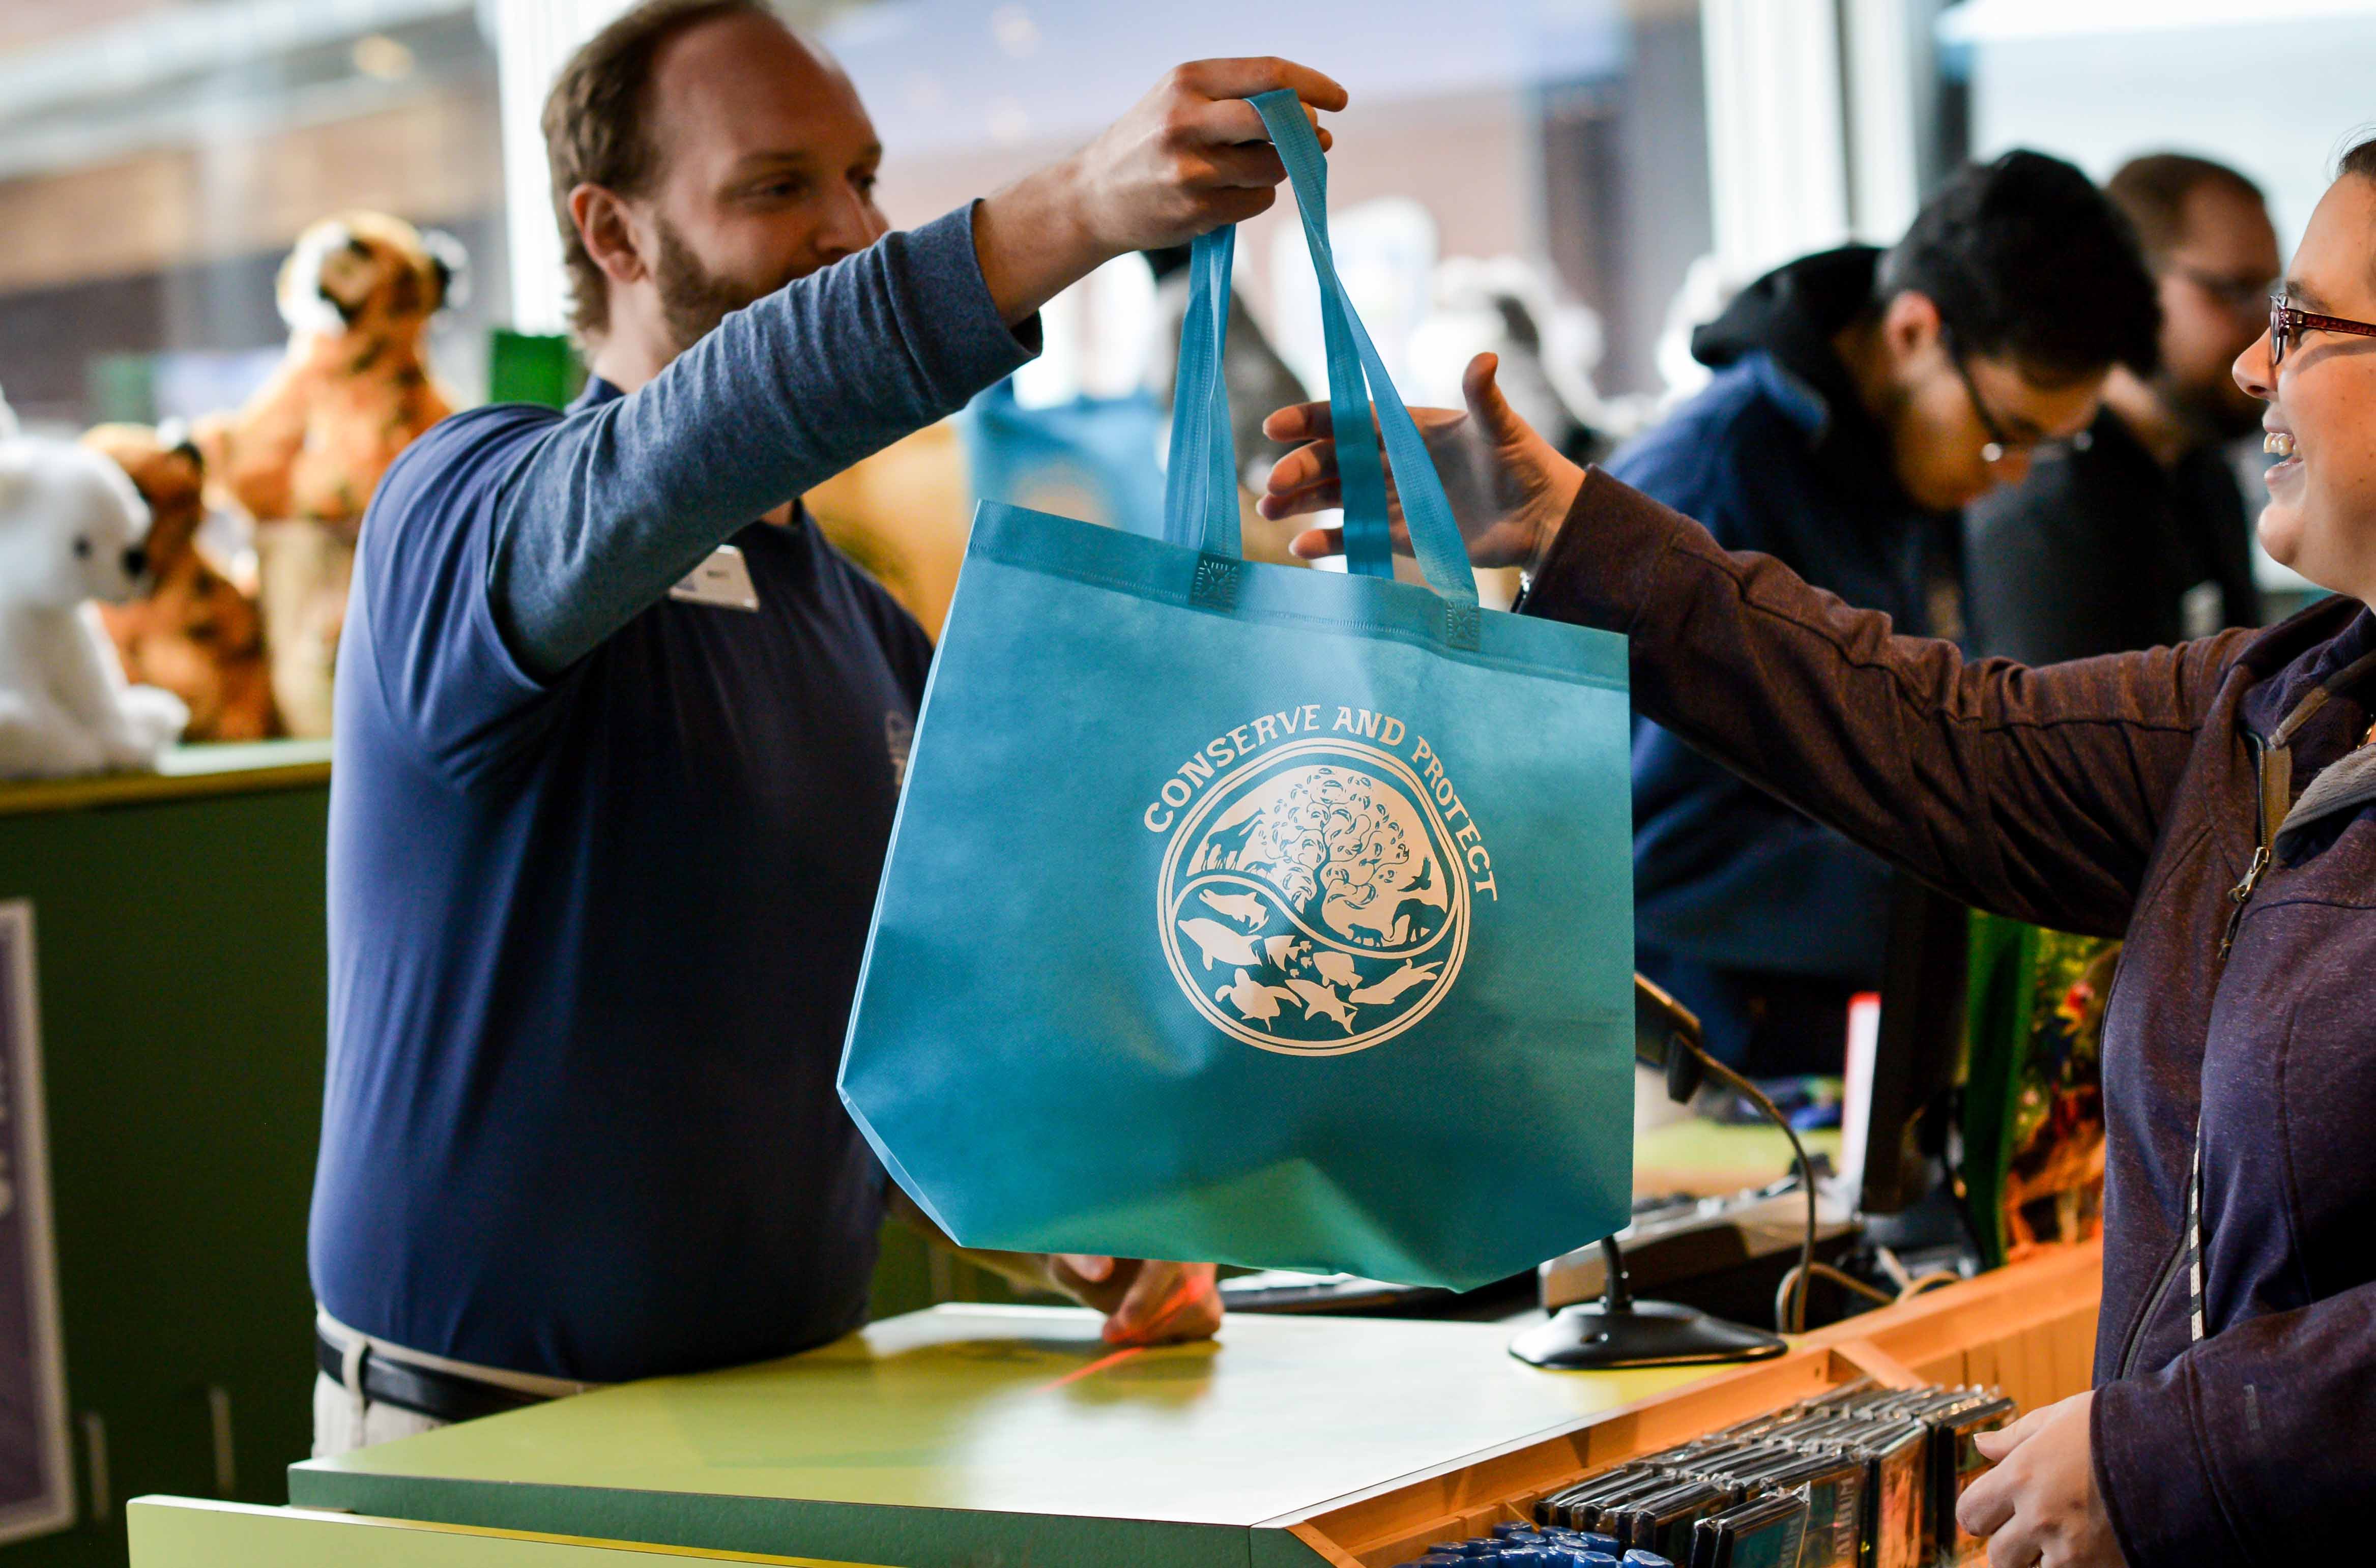 Staff holding reusable bag in gift shop.